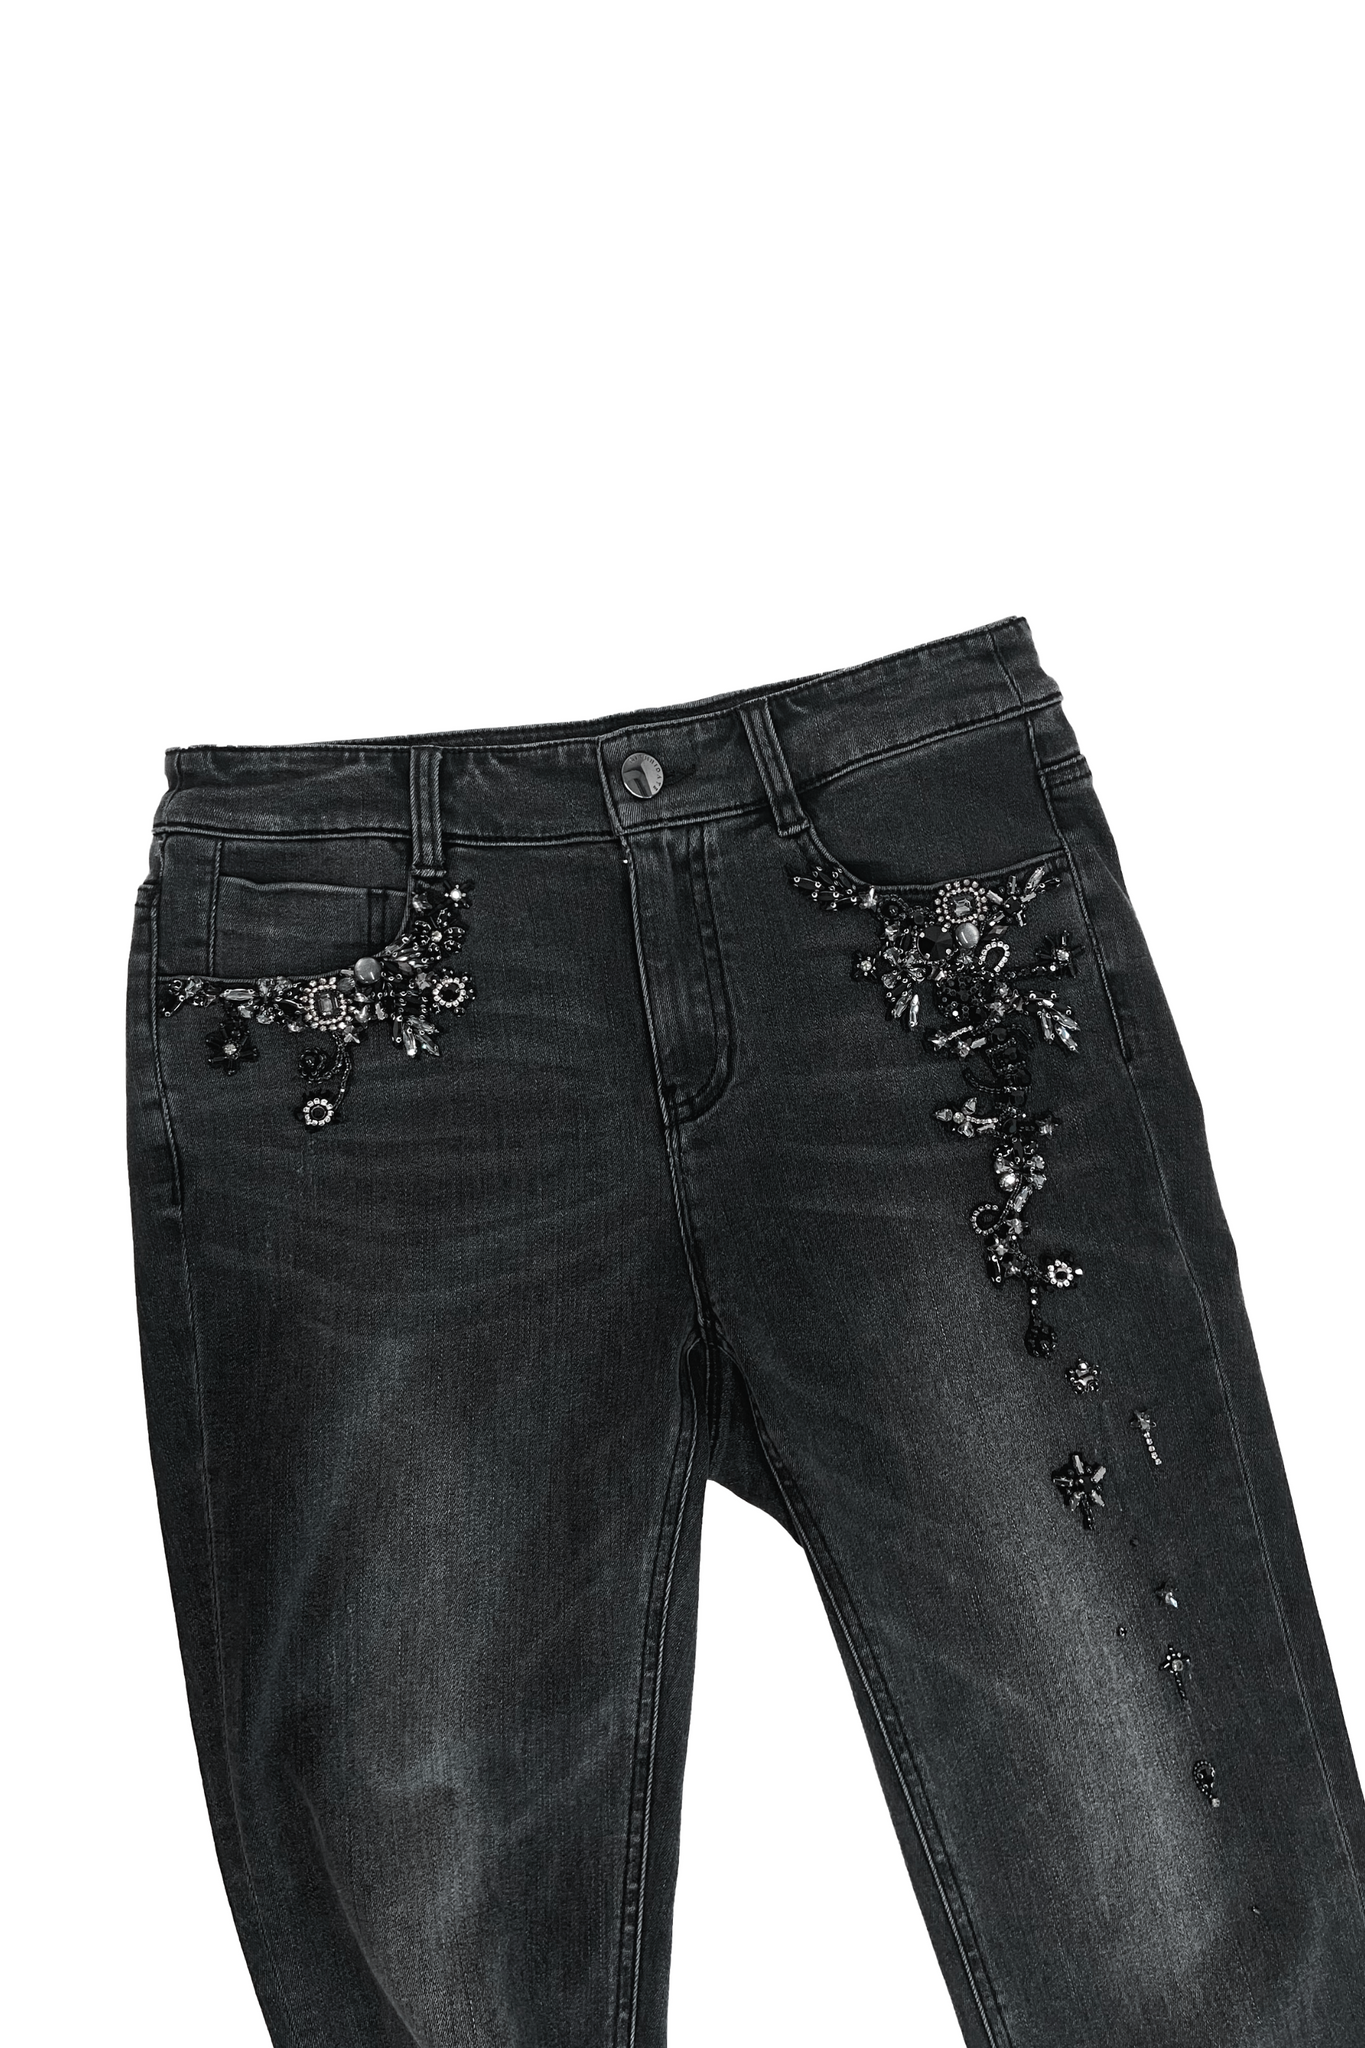 Rhinestone Embroidered Jeans